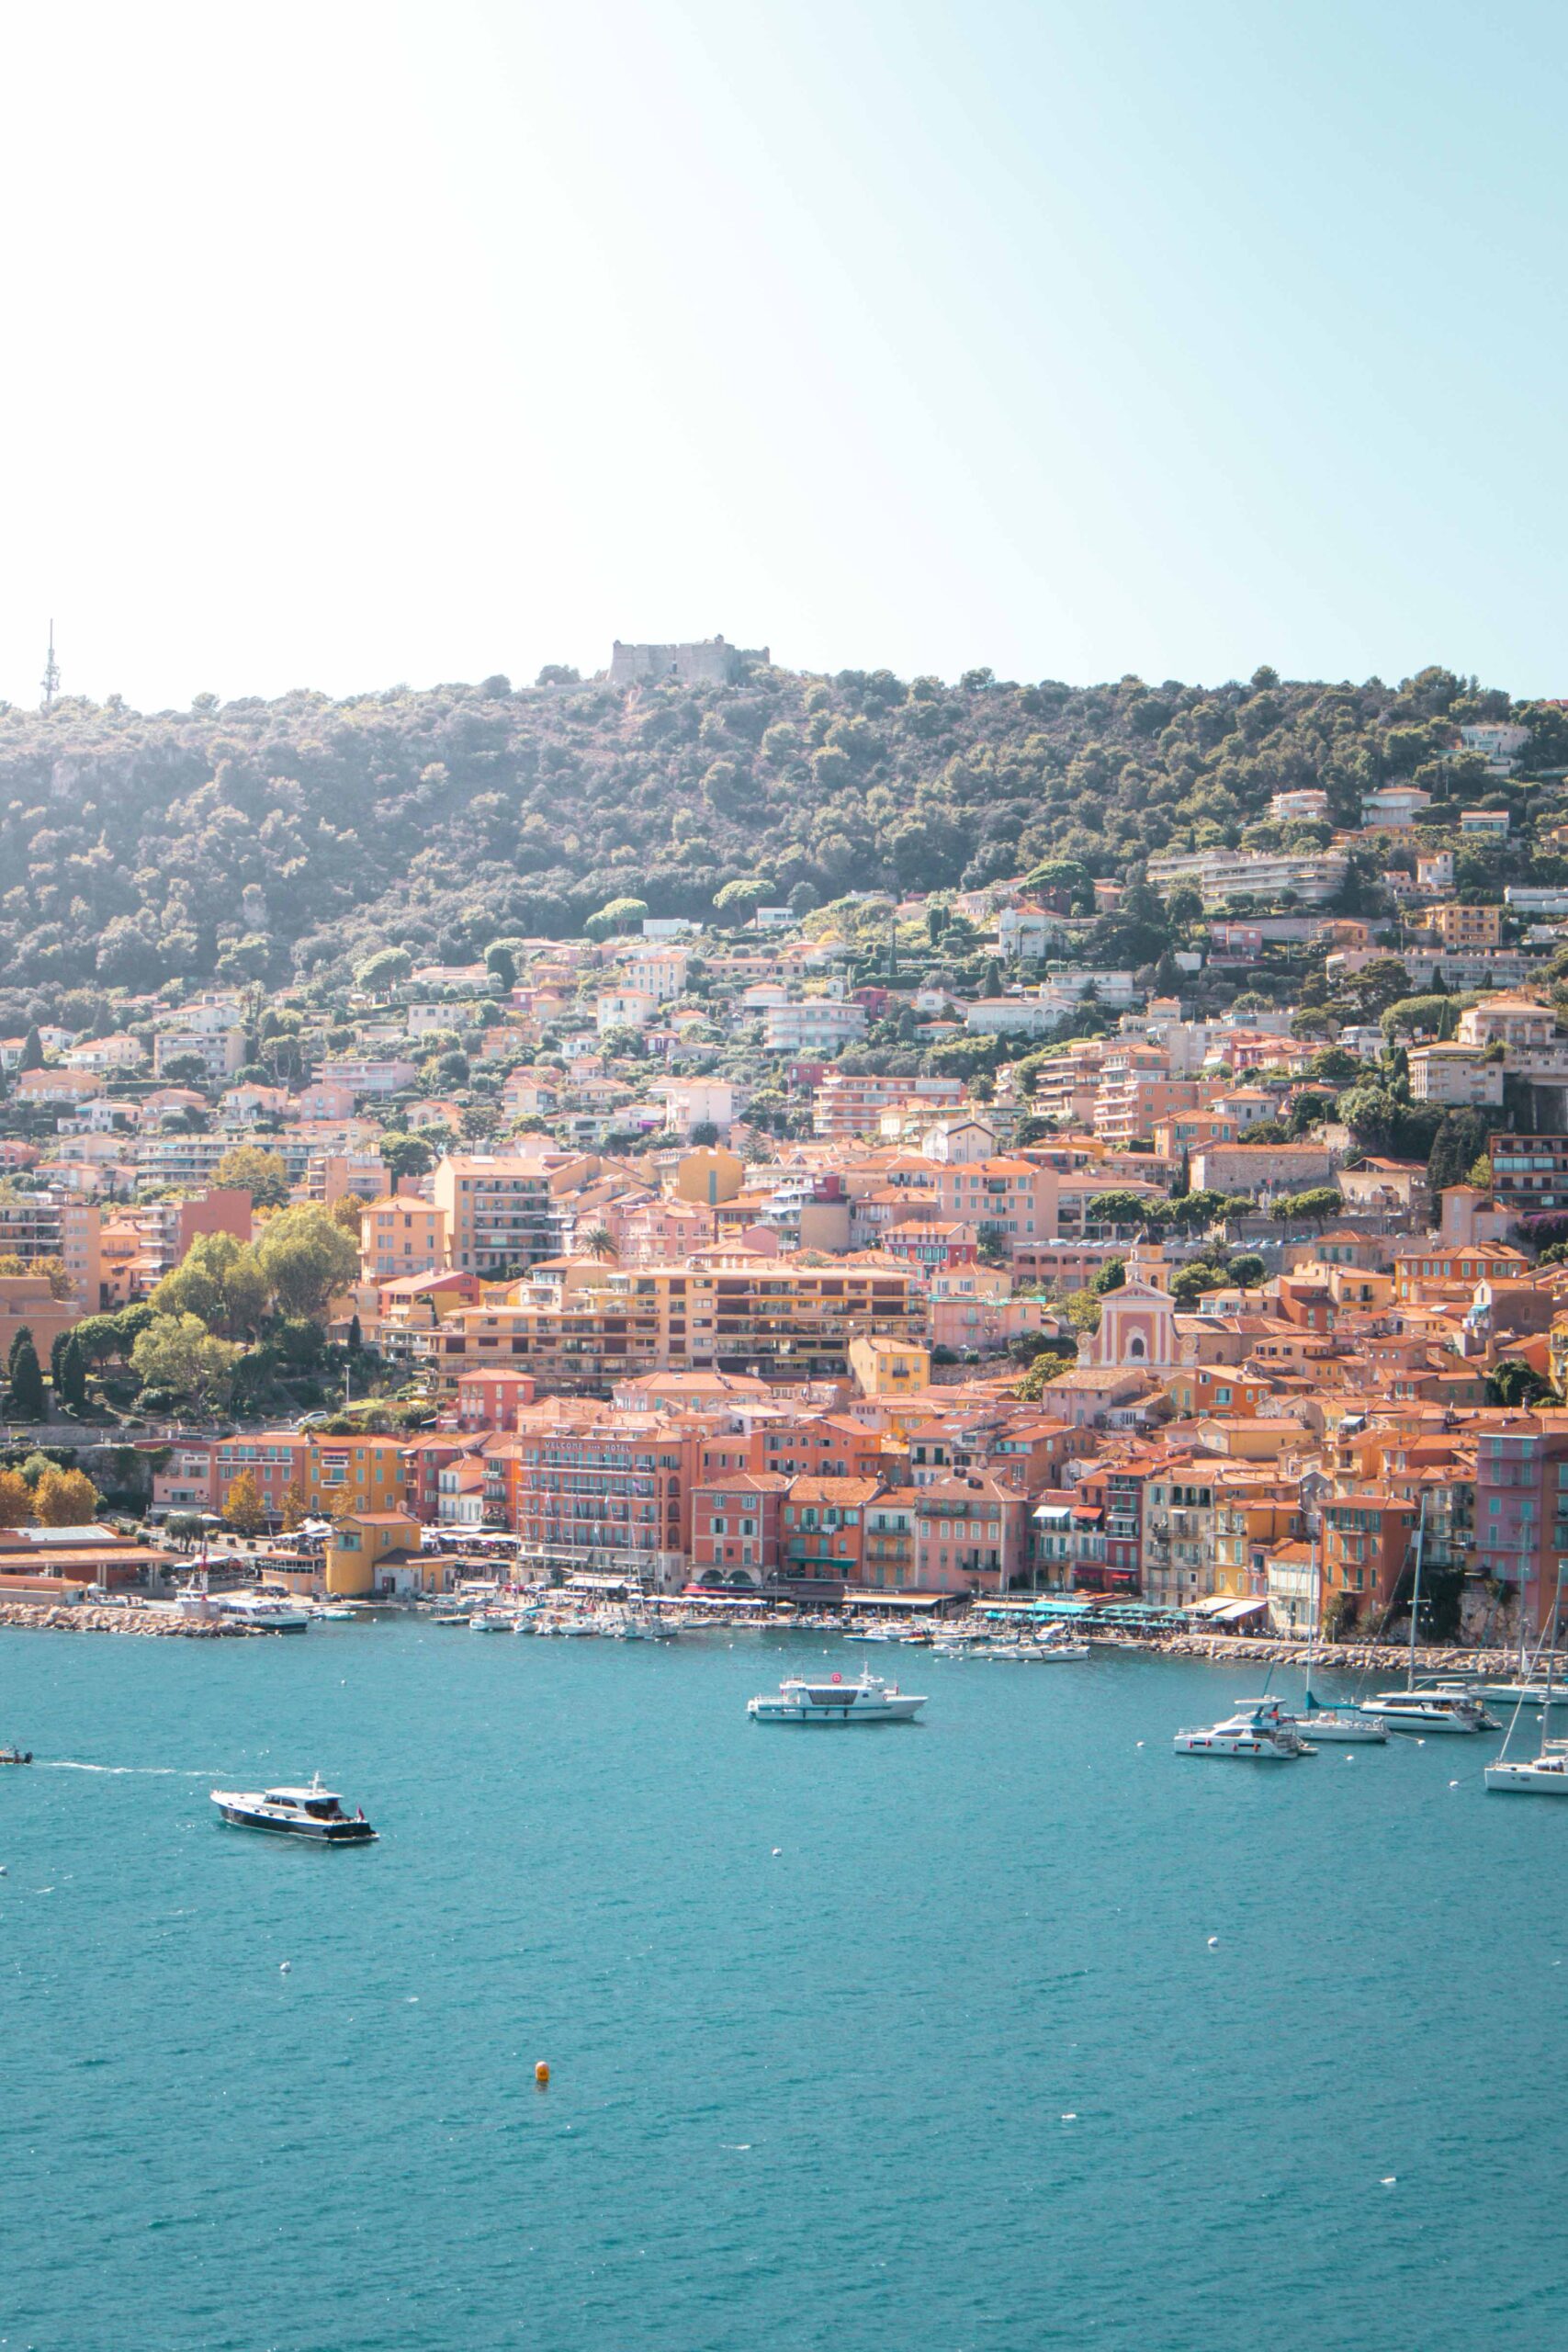 Panoramic view of the waterfront of Villefranche-sur-Mer and Fort Mont Alban in Villefranche-sur-Mer, France